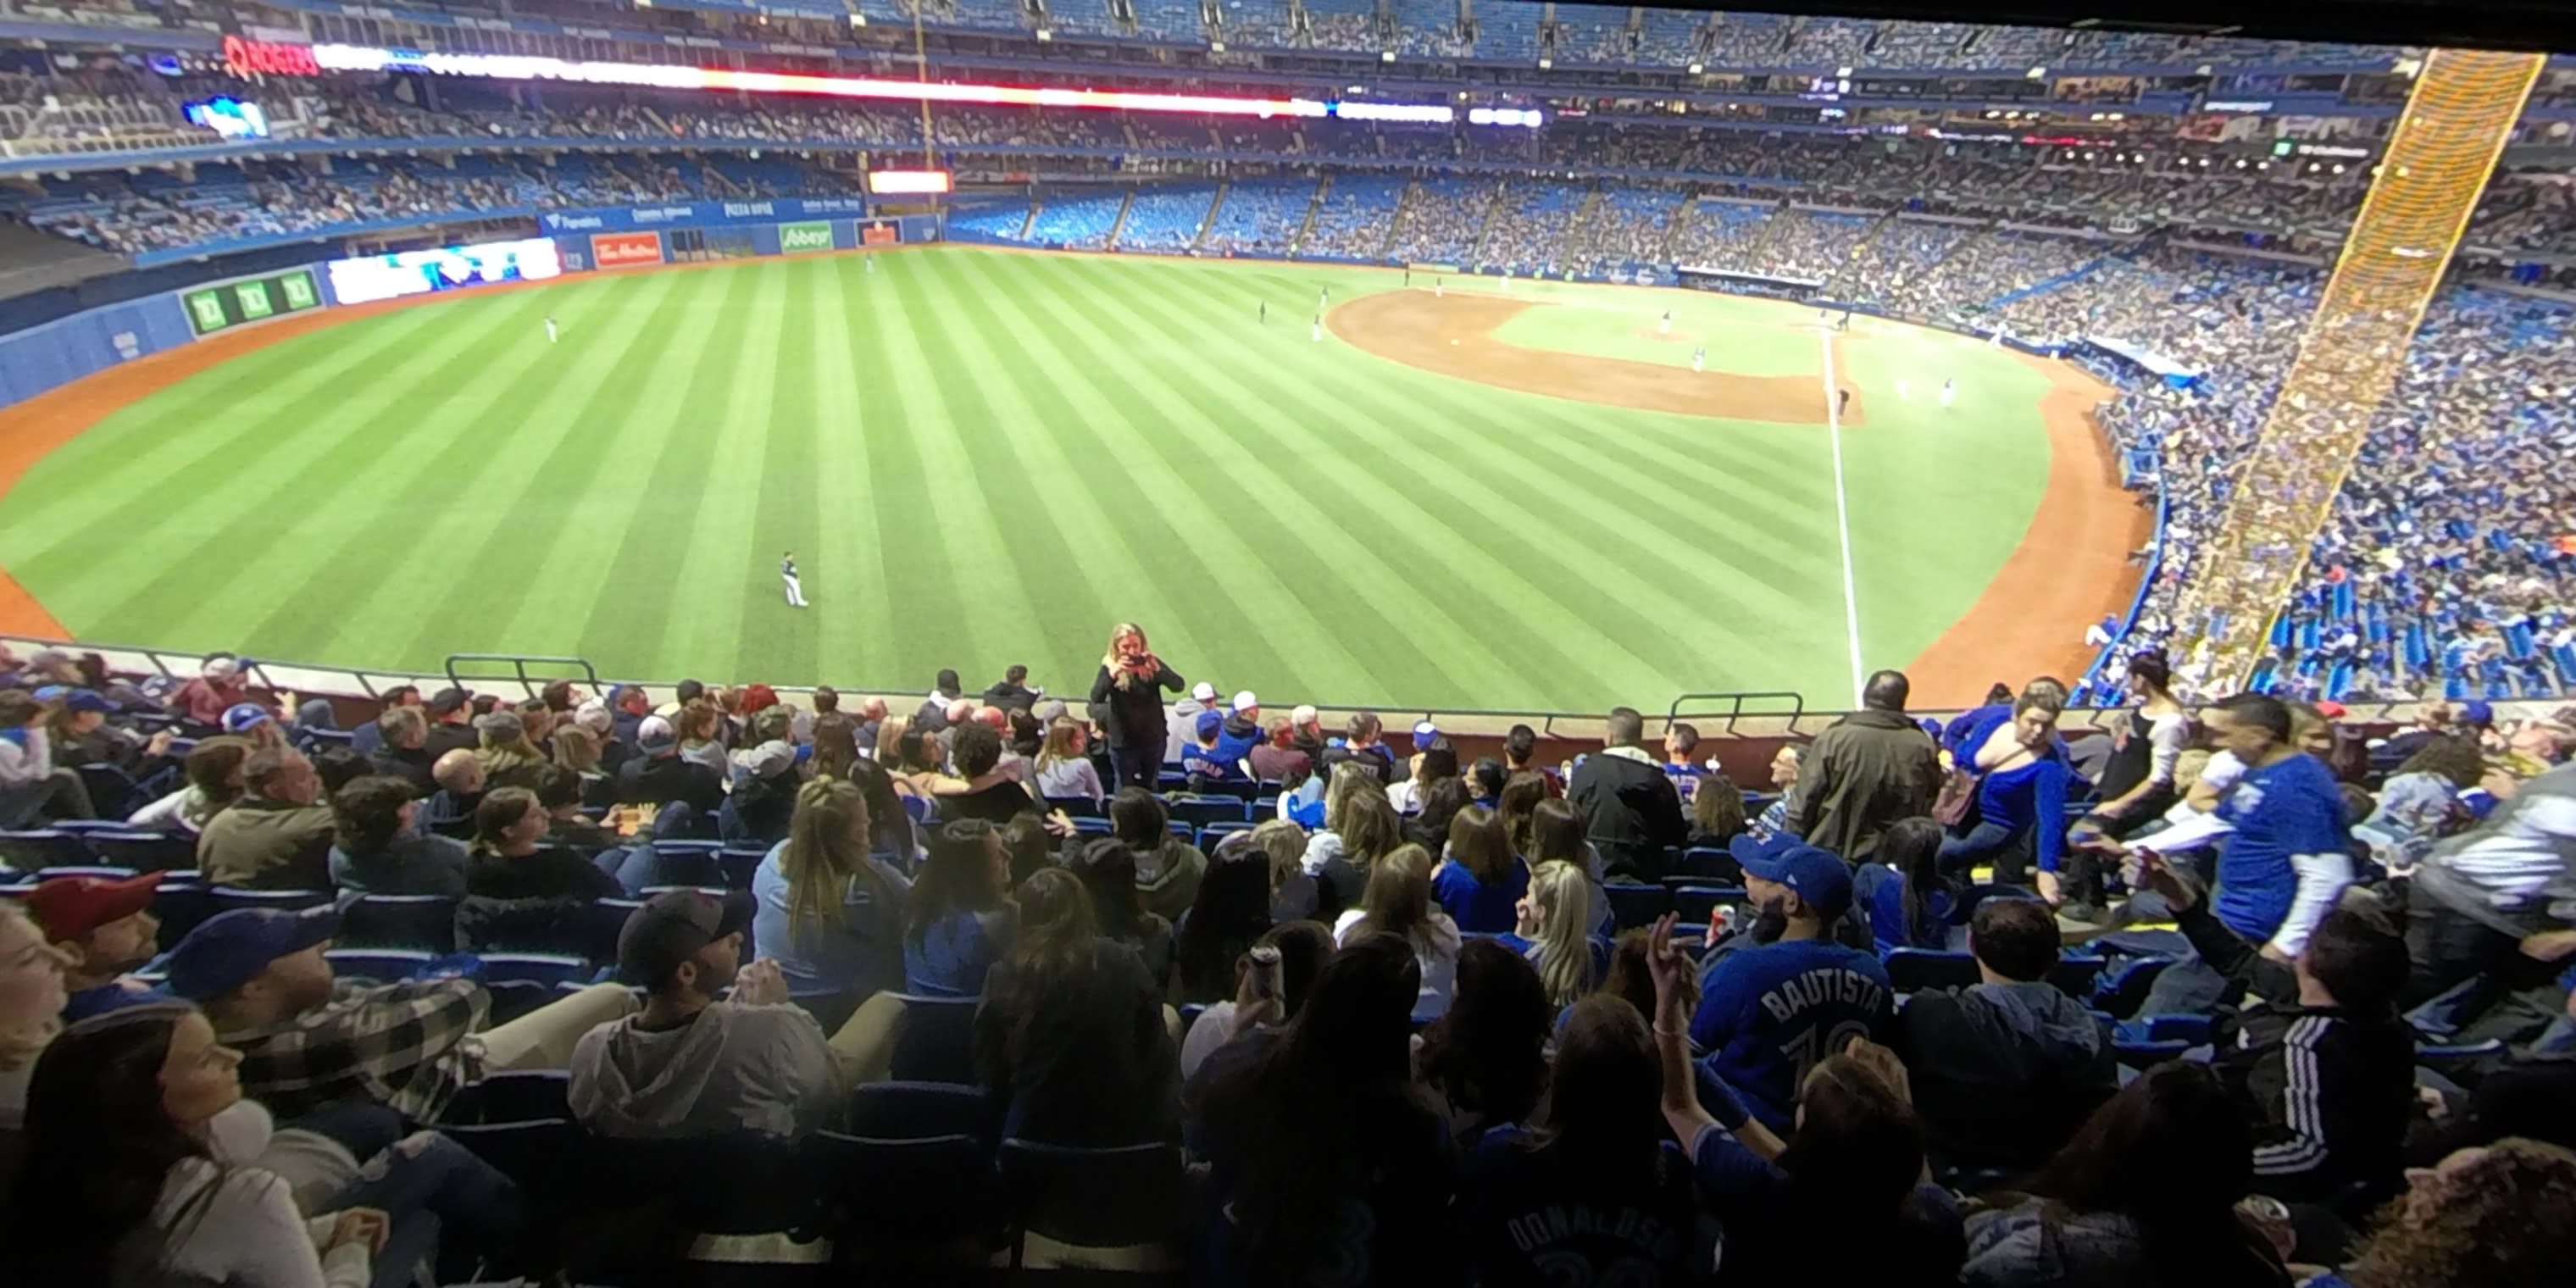 section 240 panoramic seat view  for baseball - rogers centre